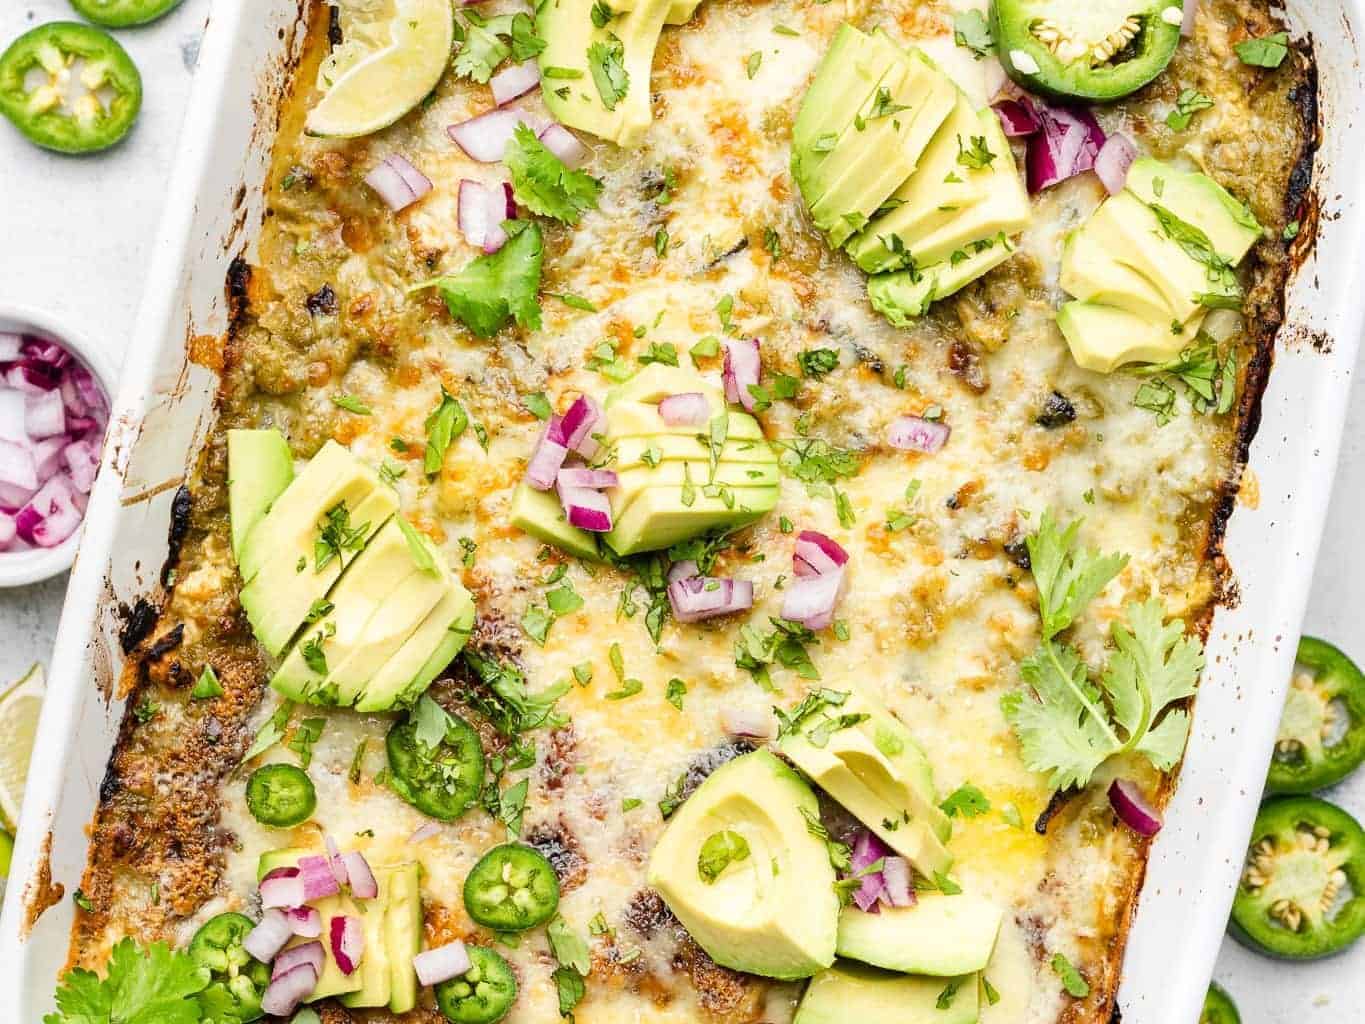 Chicken casserole topped with green chilies, avocado slices, and herbs.